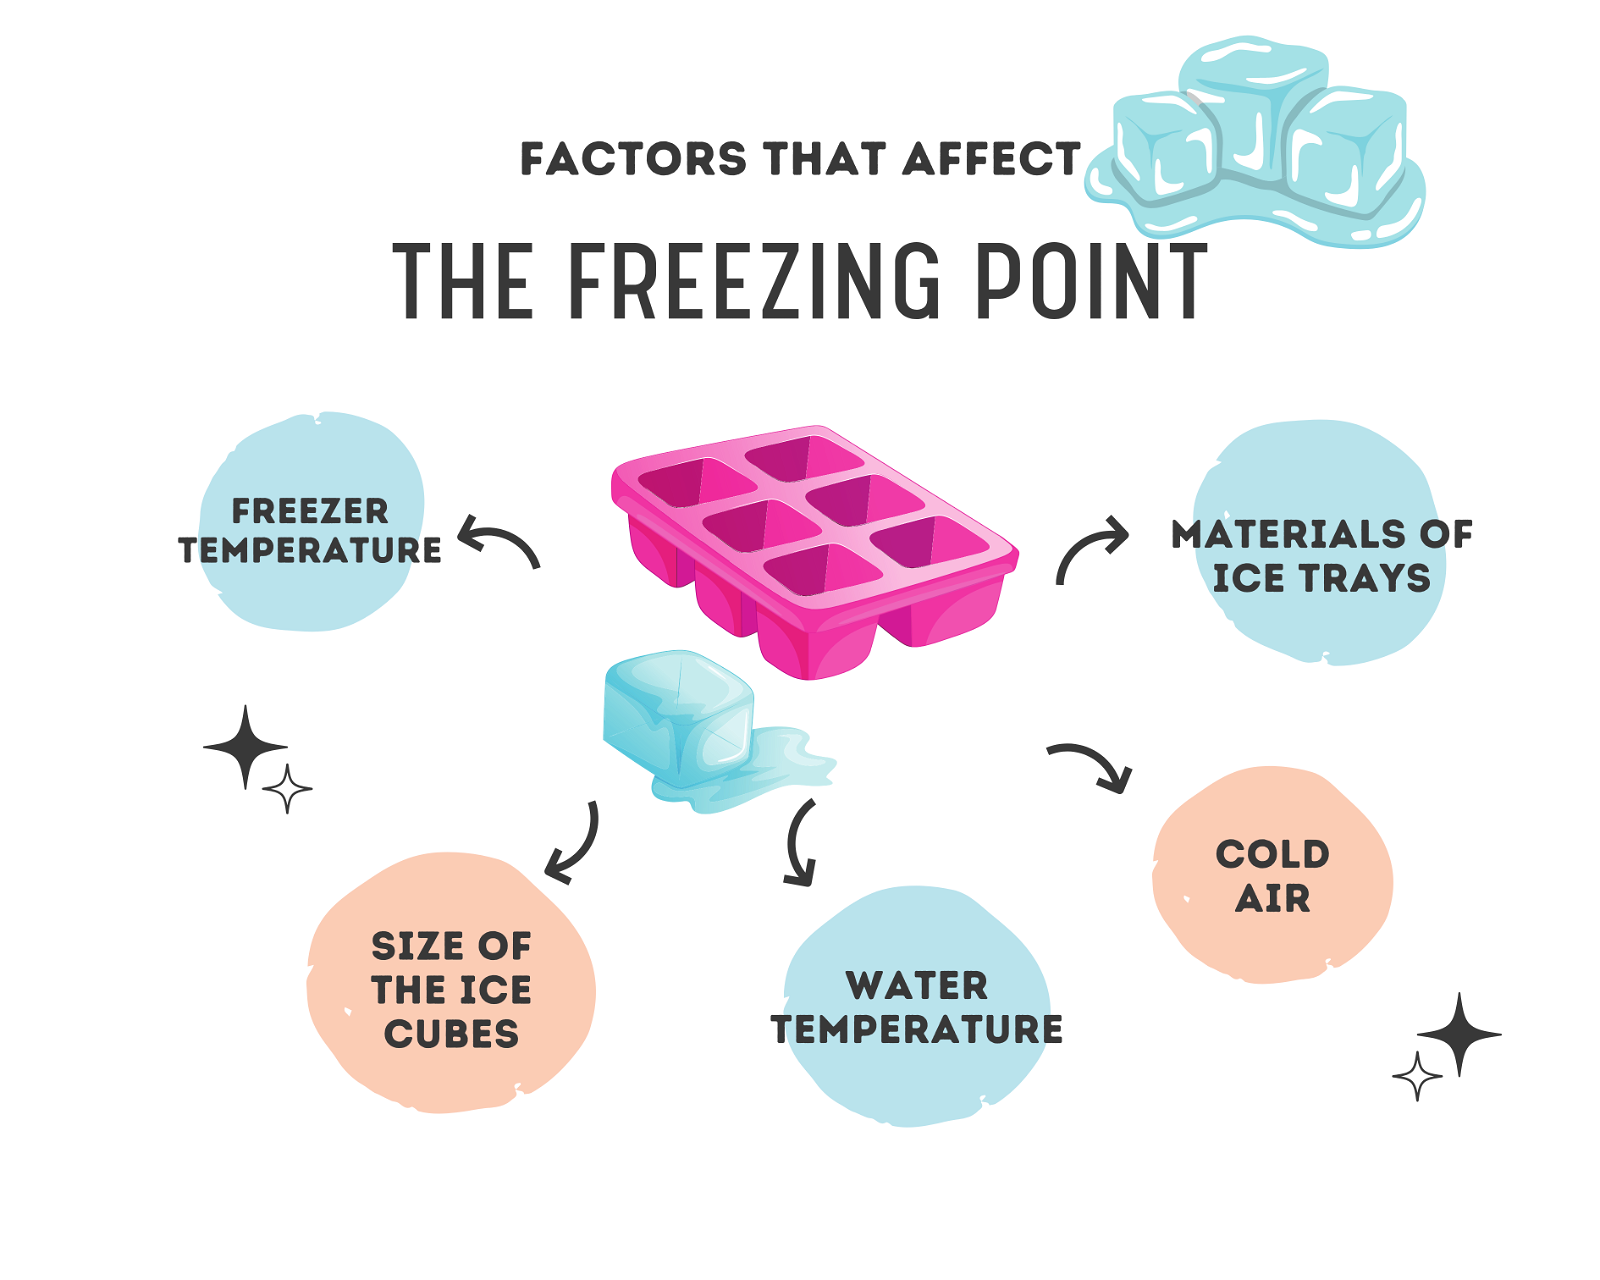 How Long Does It Take for Ice Cubes to Freeze?